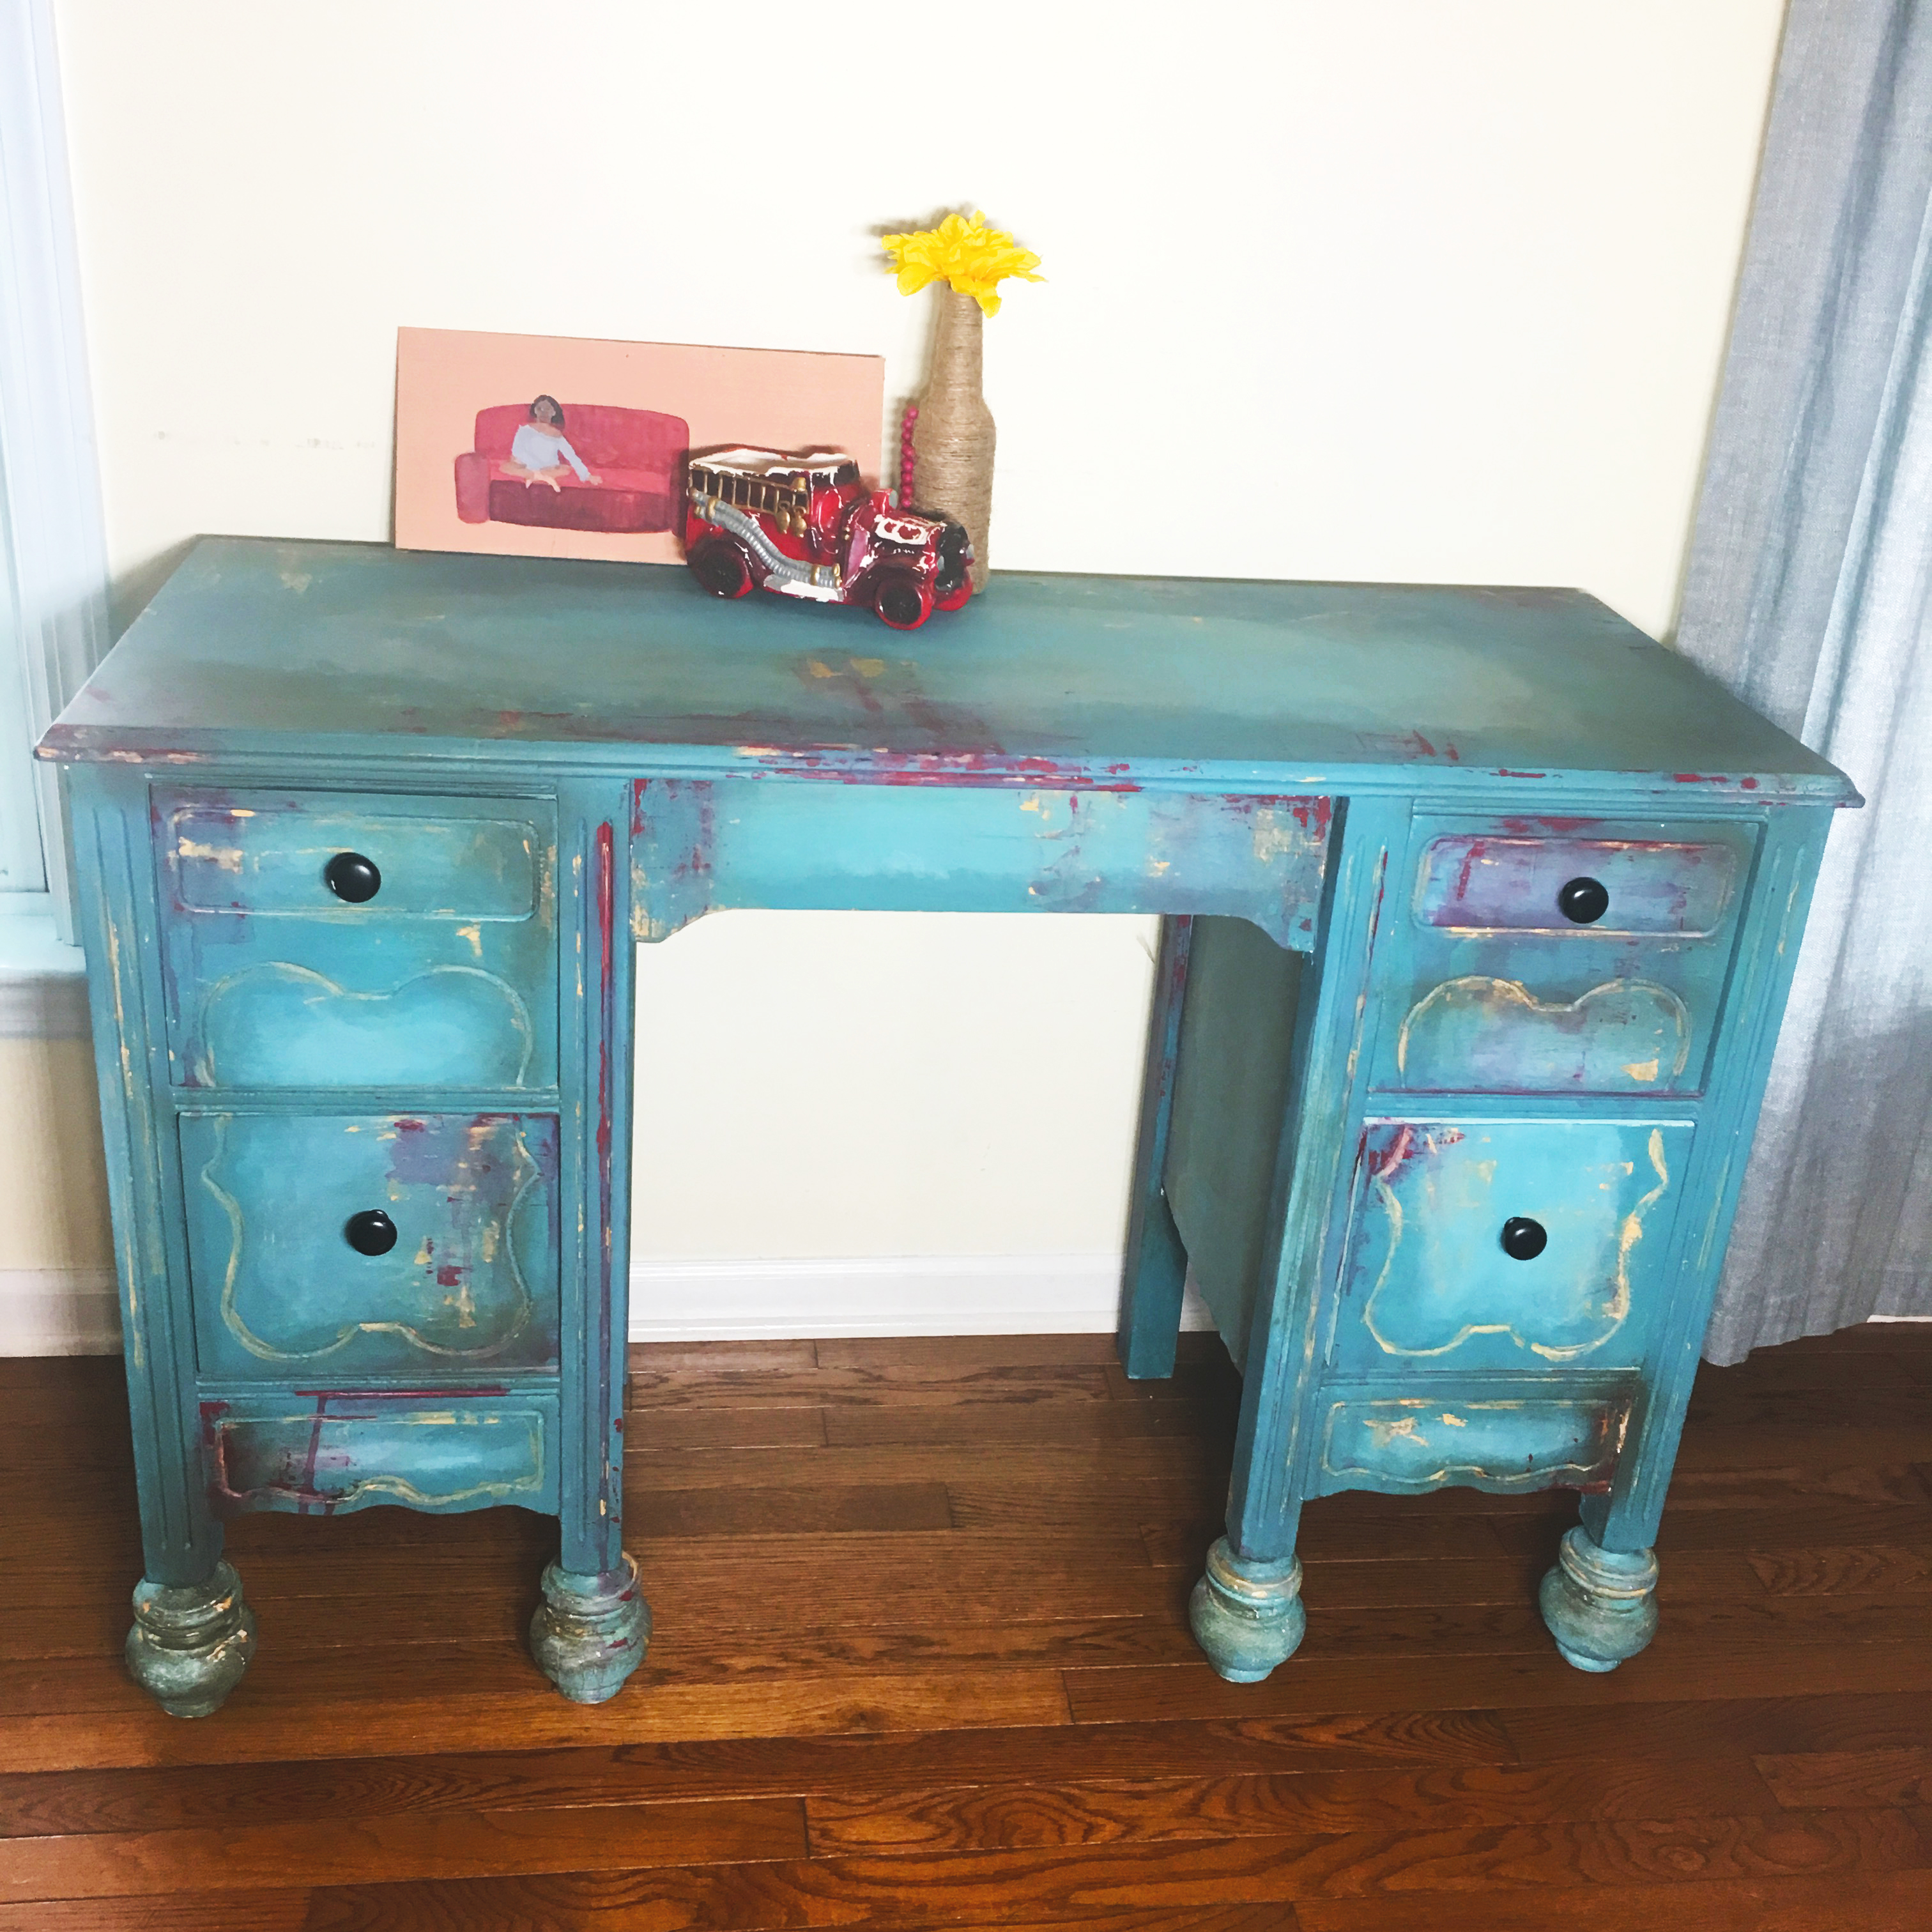 Bohemian Style On A Vintage Desk Inspirational Accent